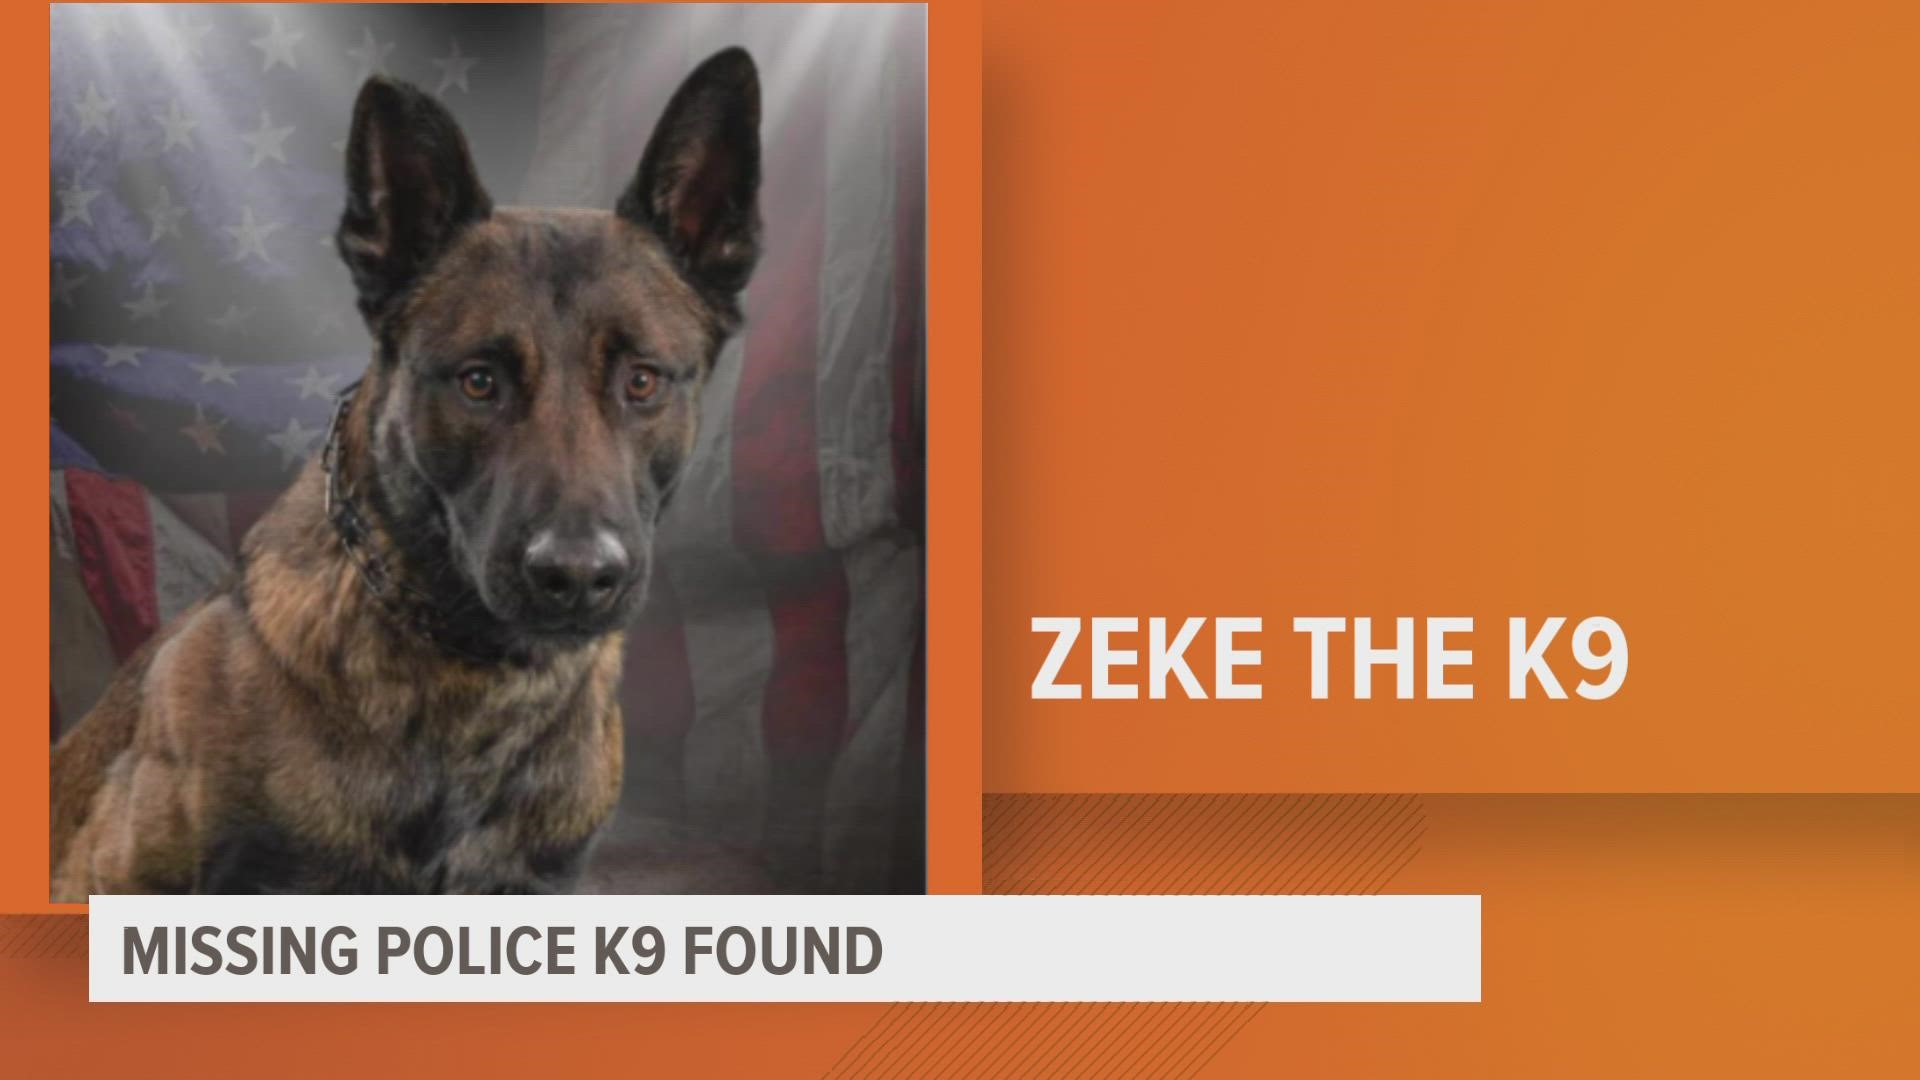 The Indianola Police Department posted on Facebook late Sunday Zeke was found. They said he is safe with his handler in Altoona.